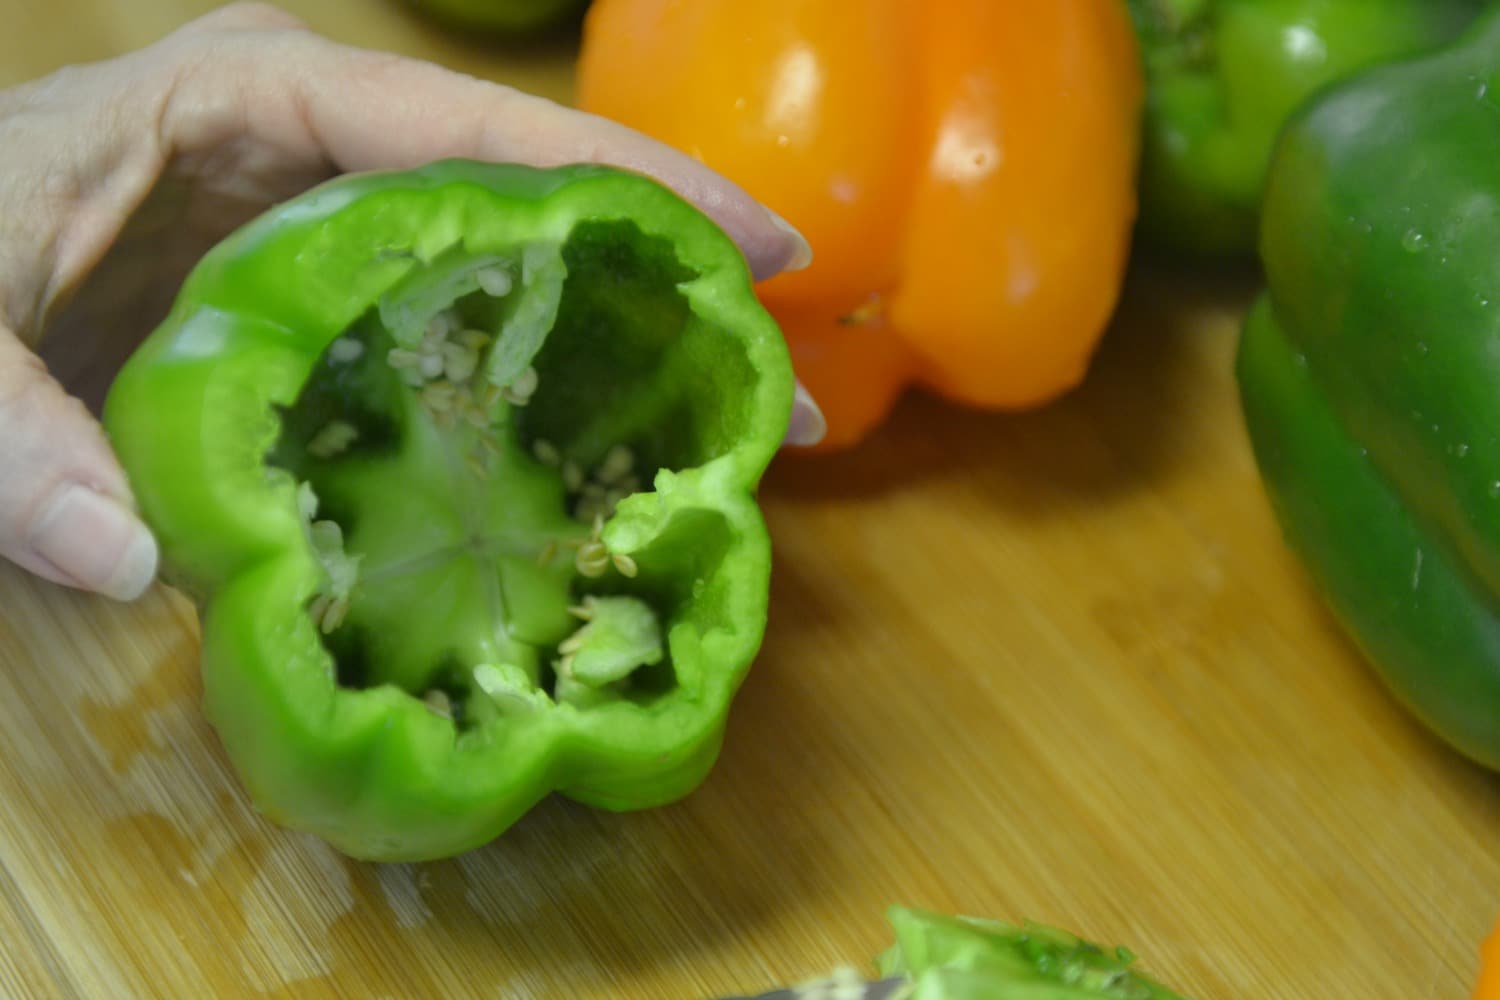 Cut the center stem out of the green bell peppers and remove the seeds. 